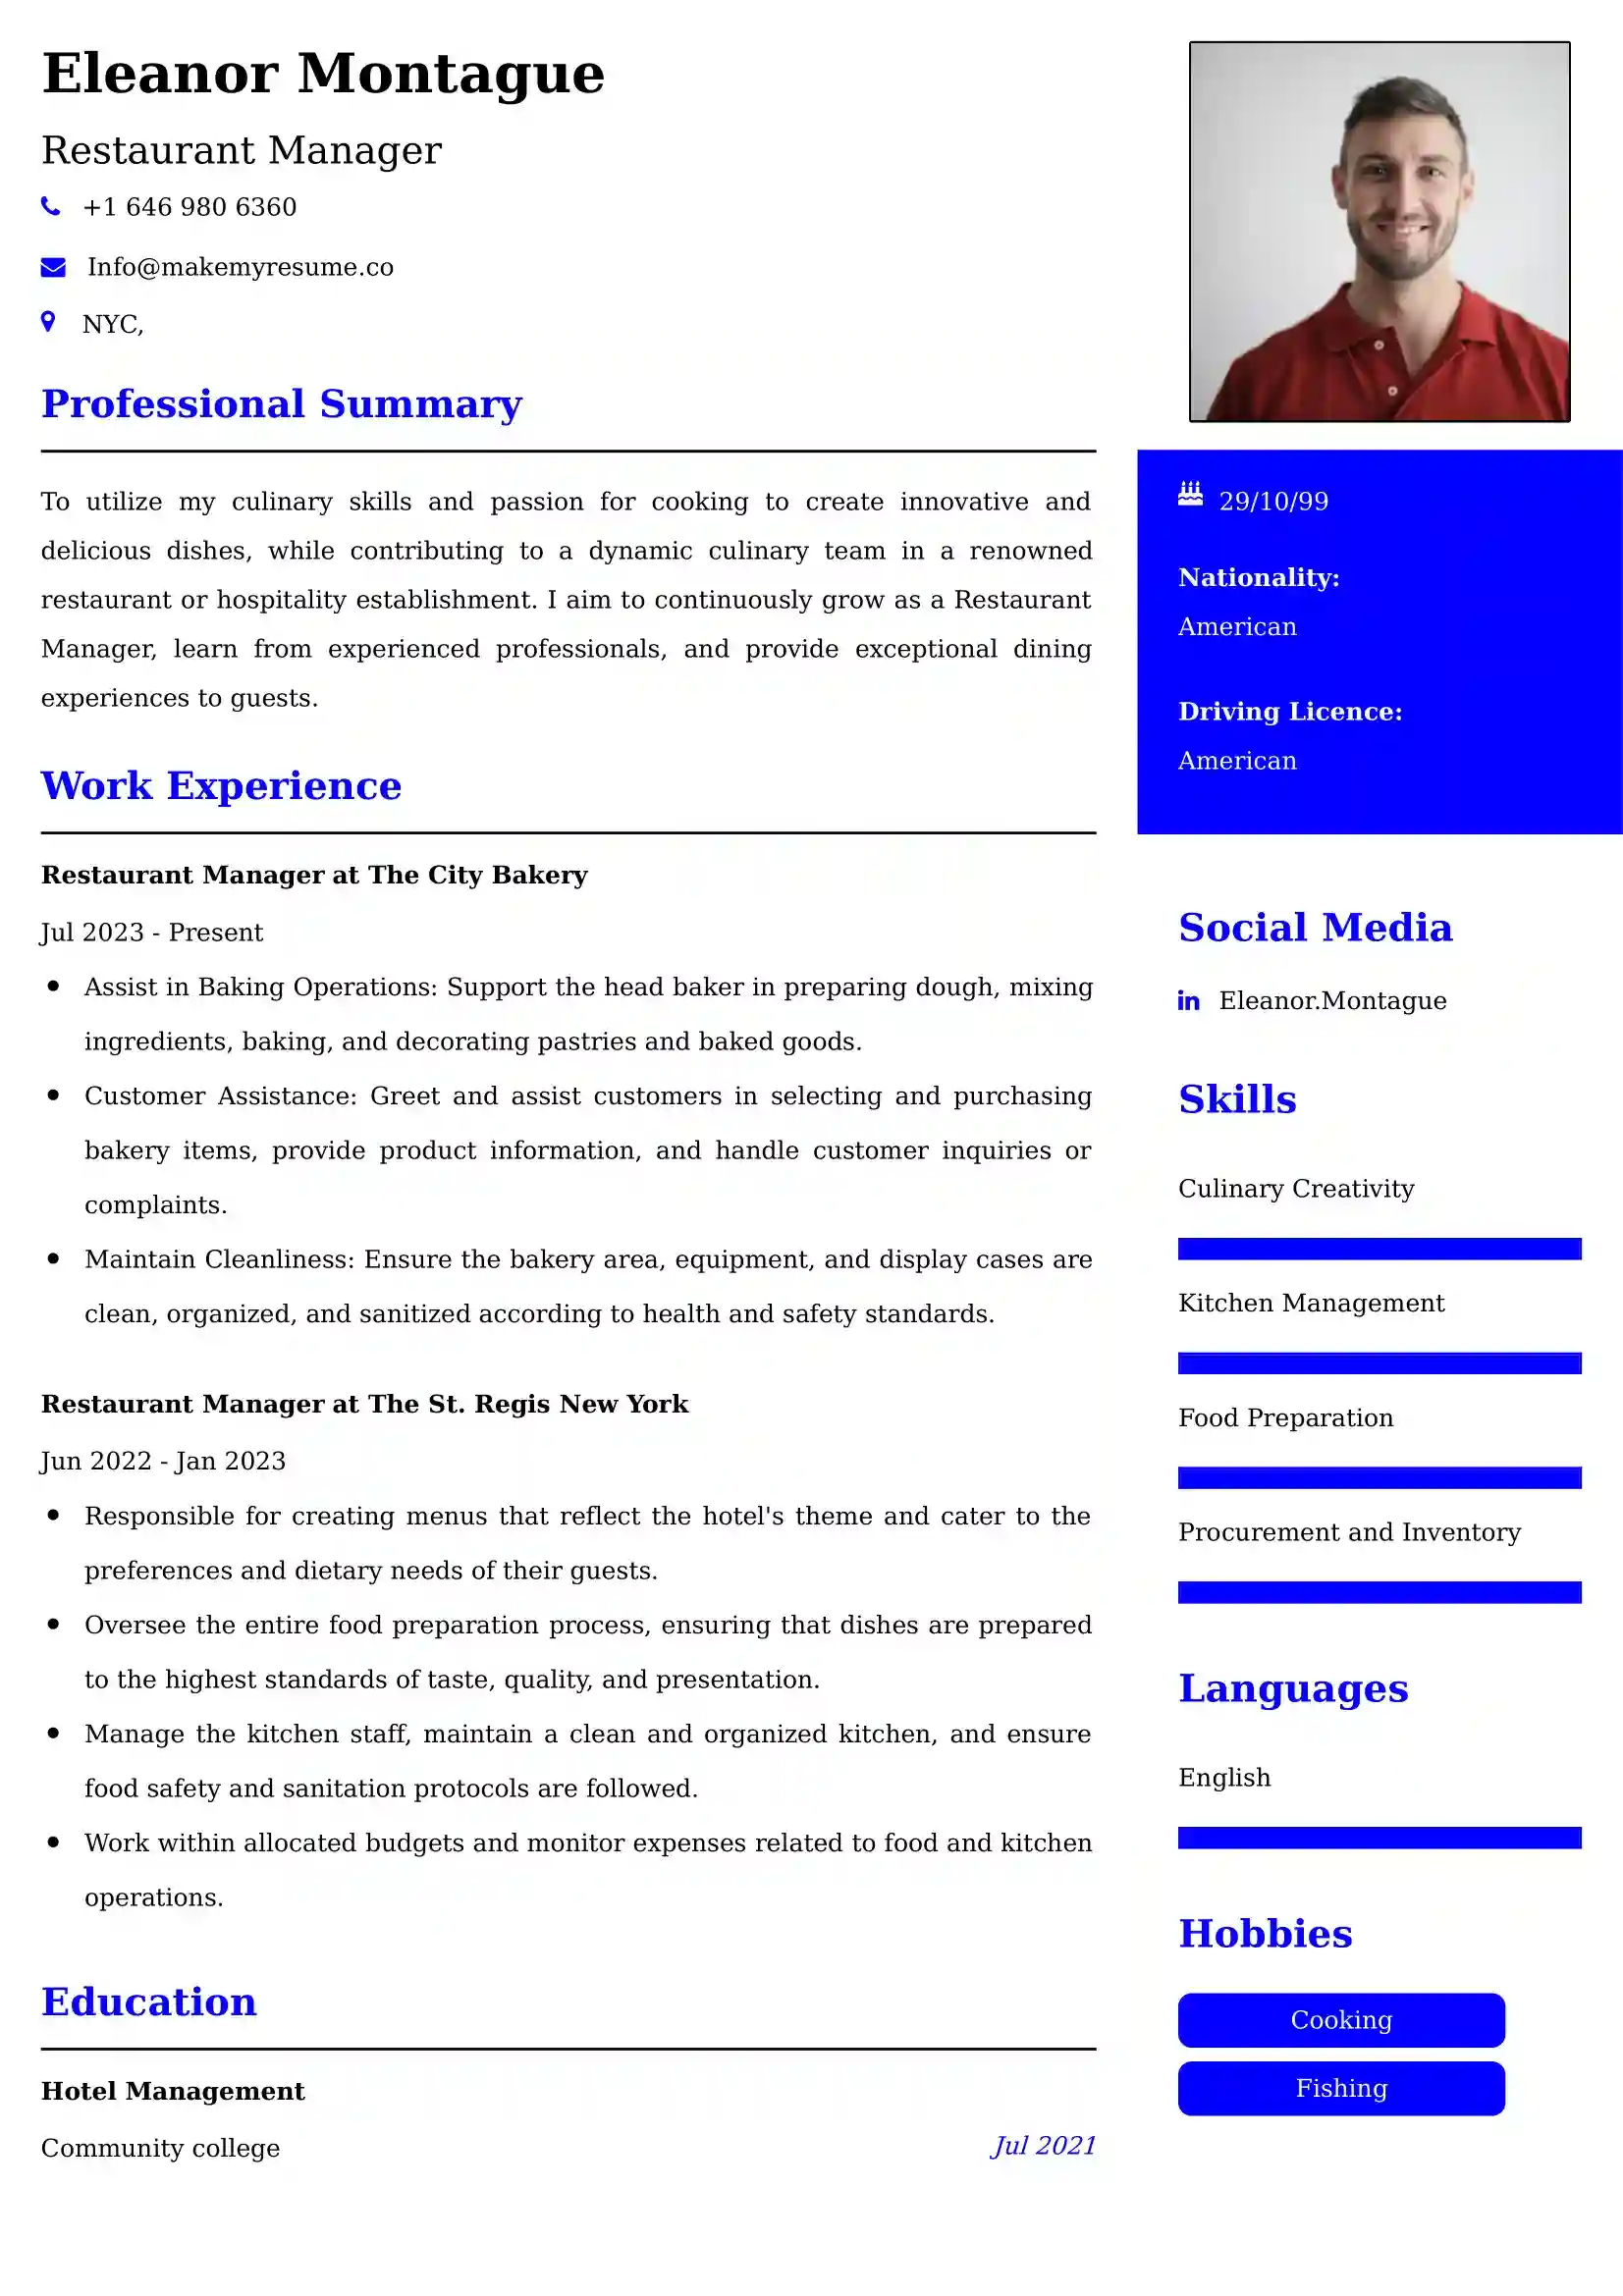 Restaurant Manager Resume Examples - Brazilian Format, Latest Template